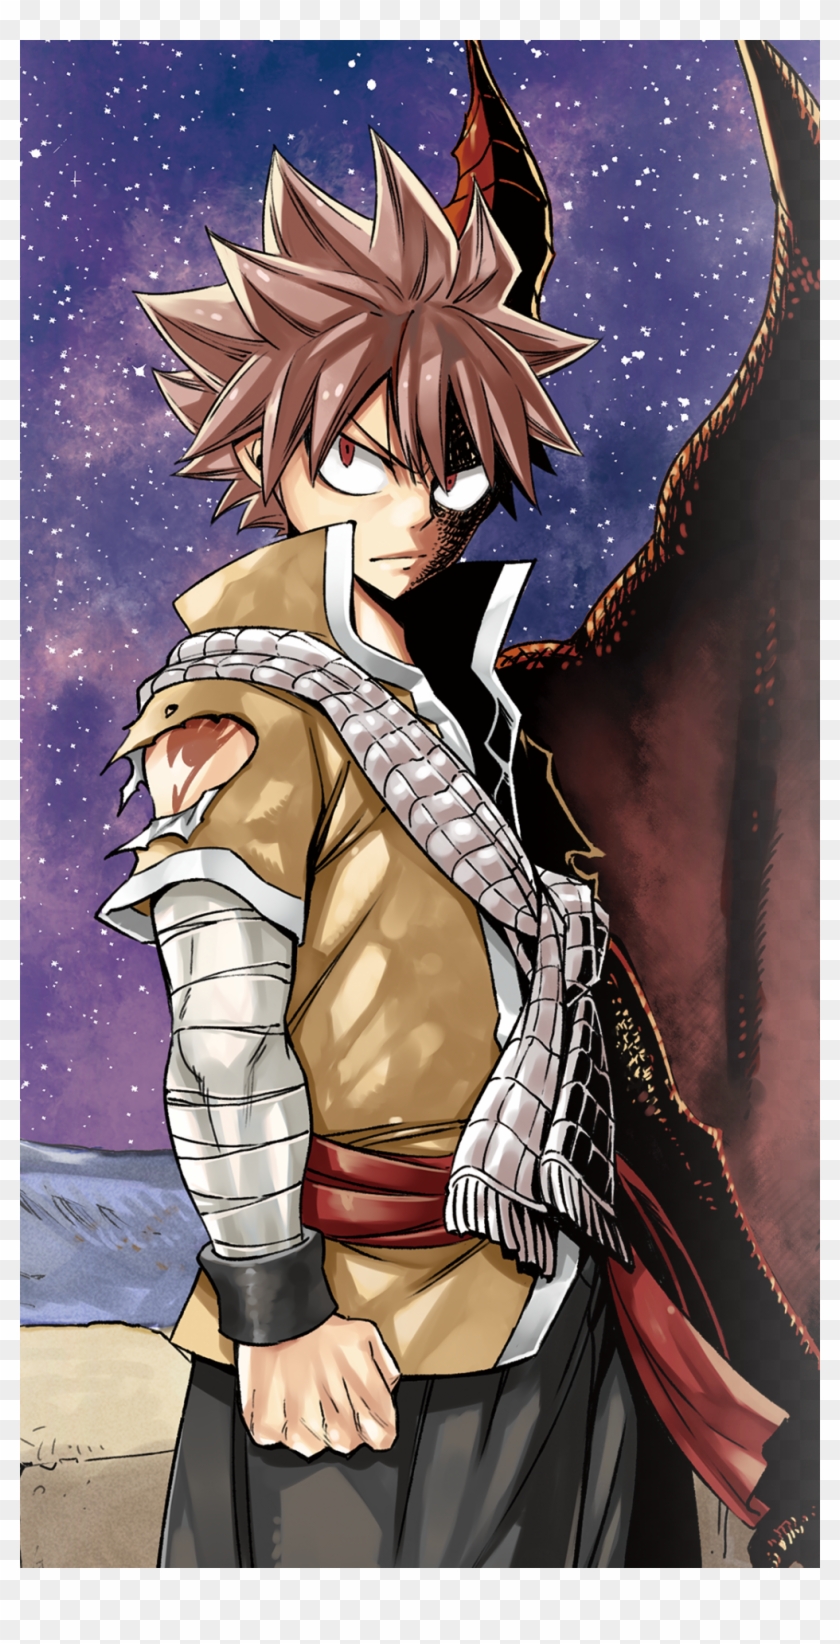 Natsu Dragneel In Dragon Cry, The Second Fairy Tail - Natsu Fairy Tail Dragon Cry Clipart #179921